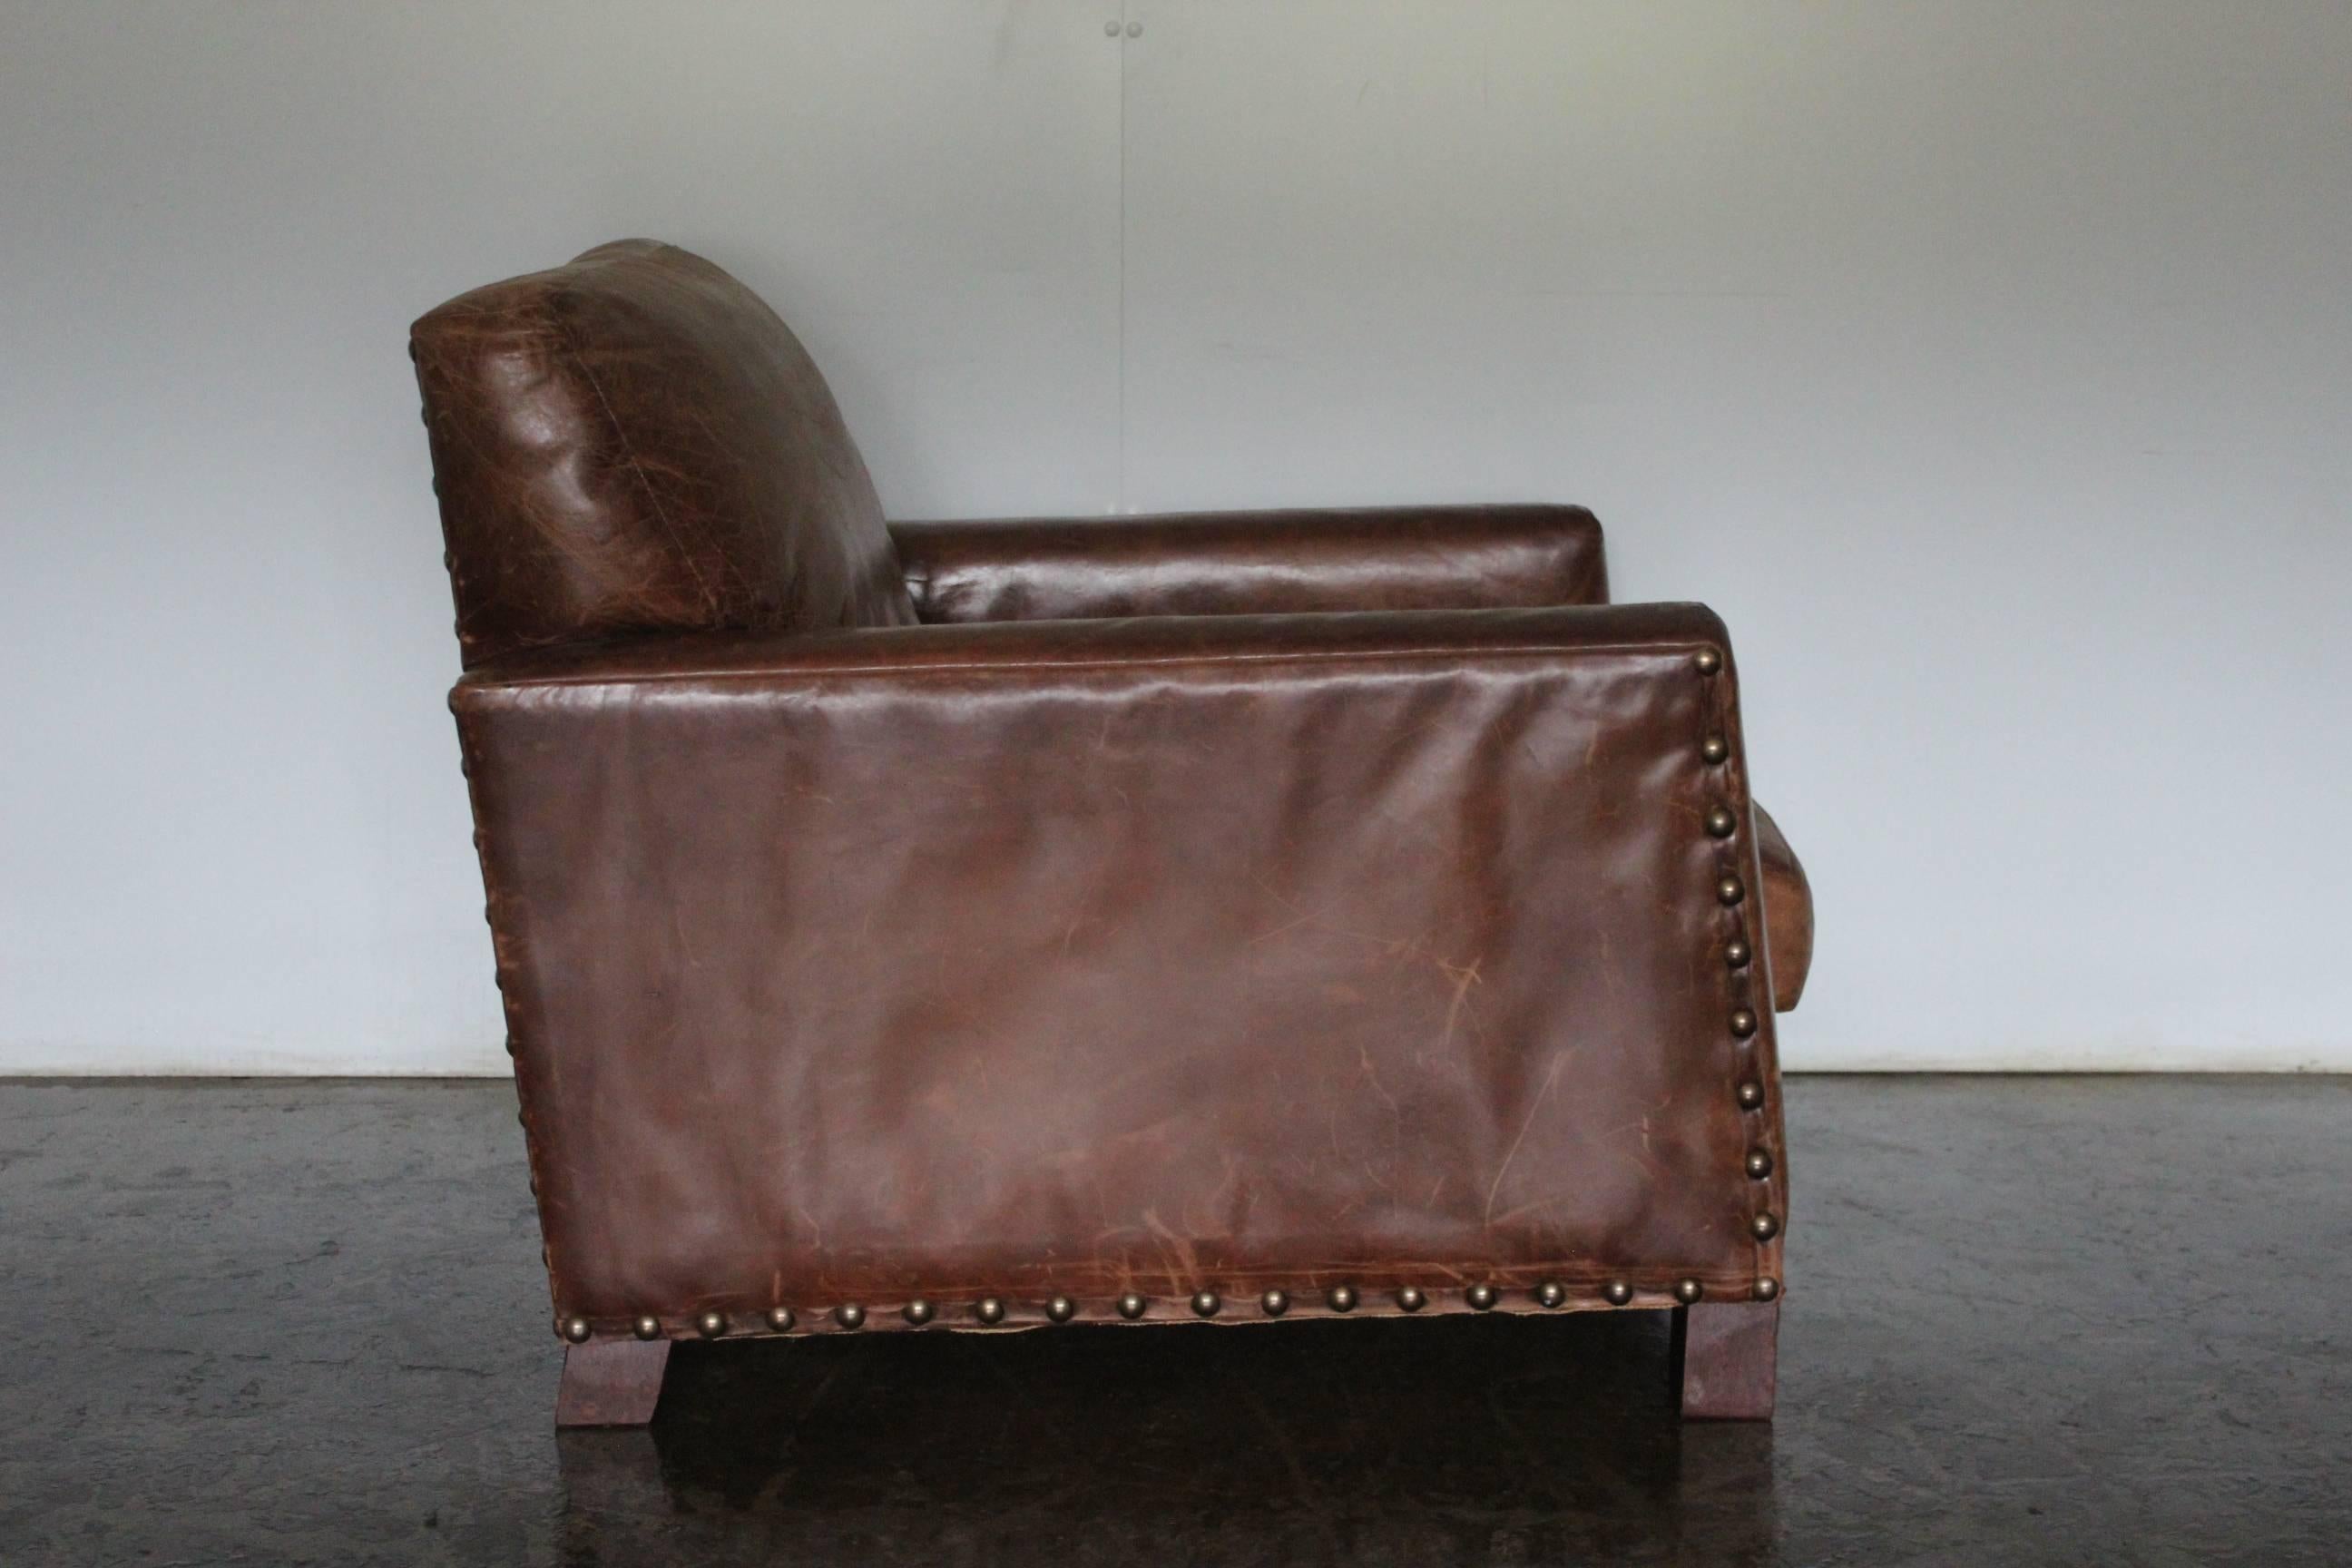 American Classical Ralph Lauren “Club” Armchair and Ottoman in Vintage Brown Leather